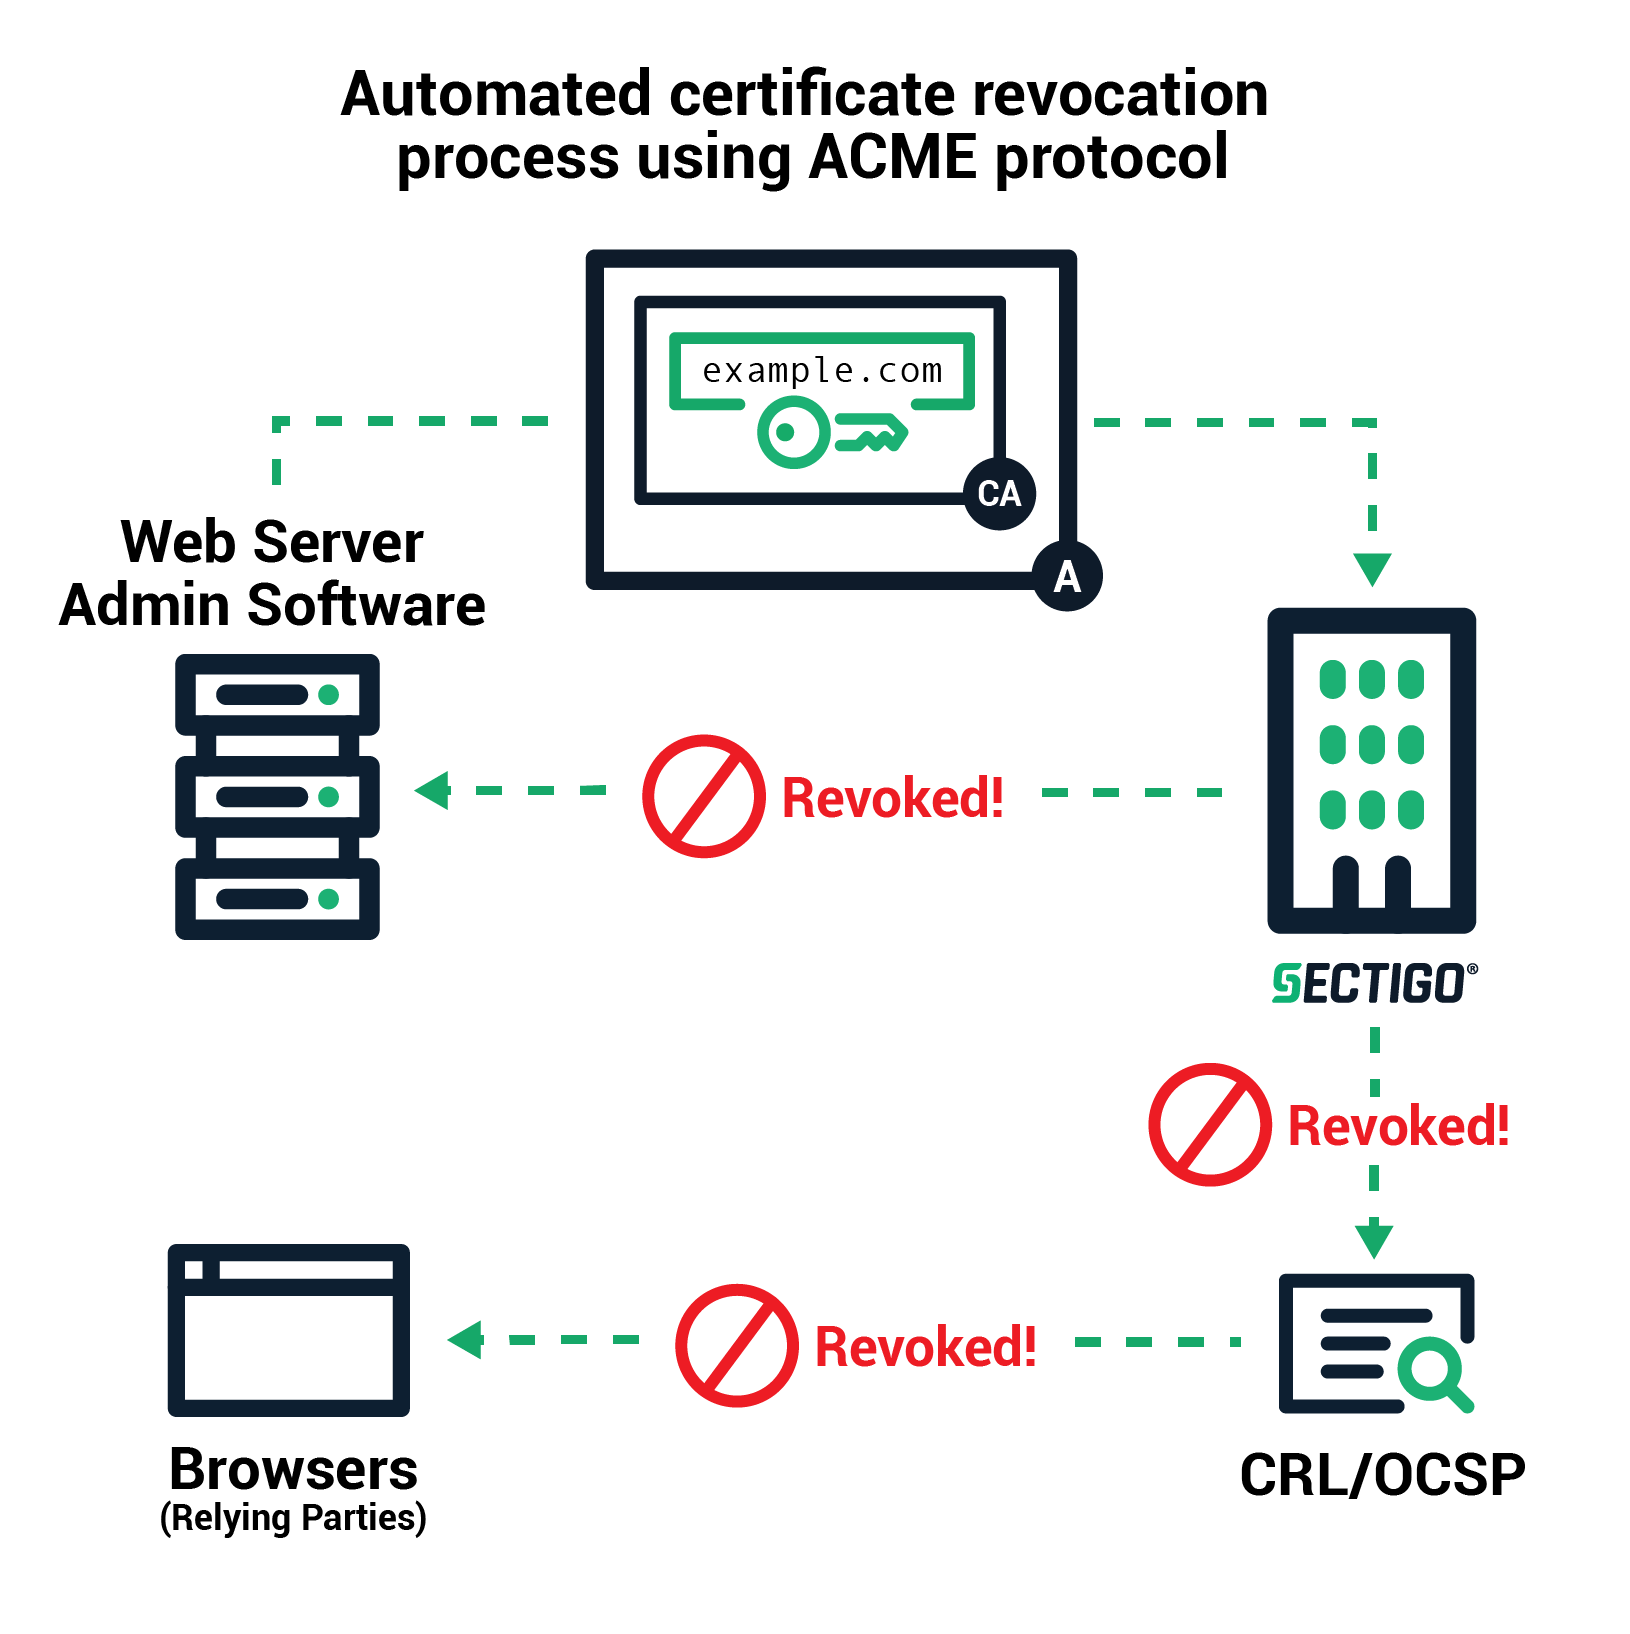 Automated certificate revocation process using ACME protocol